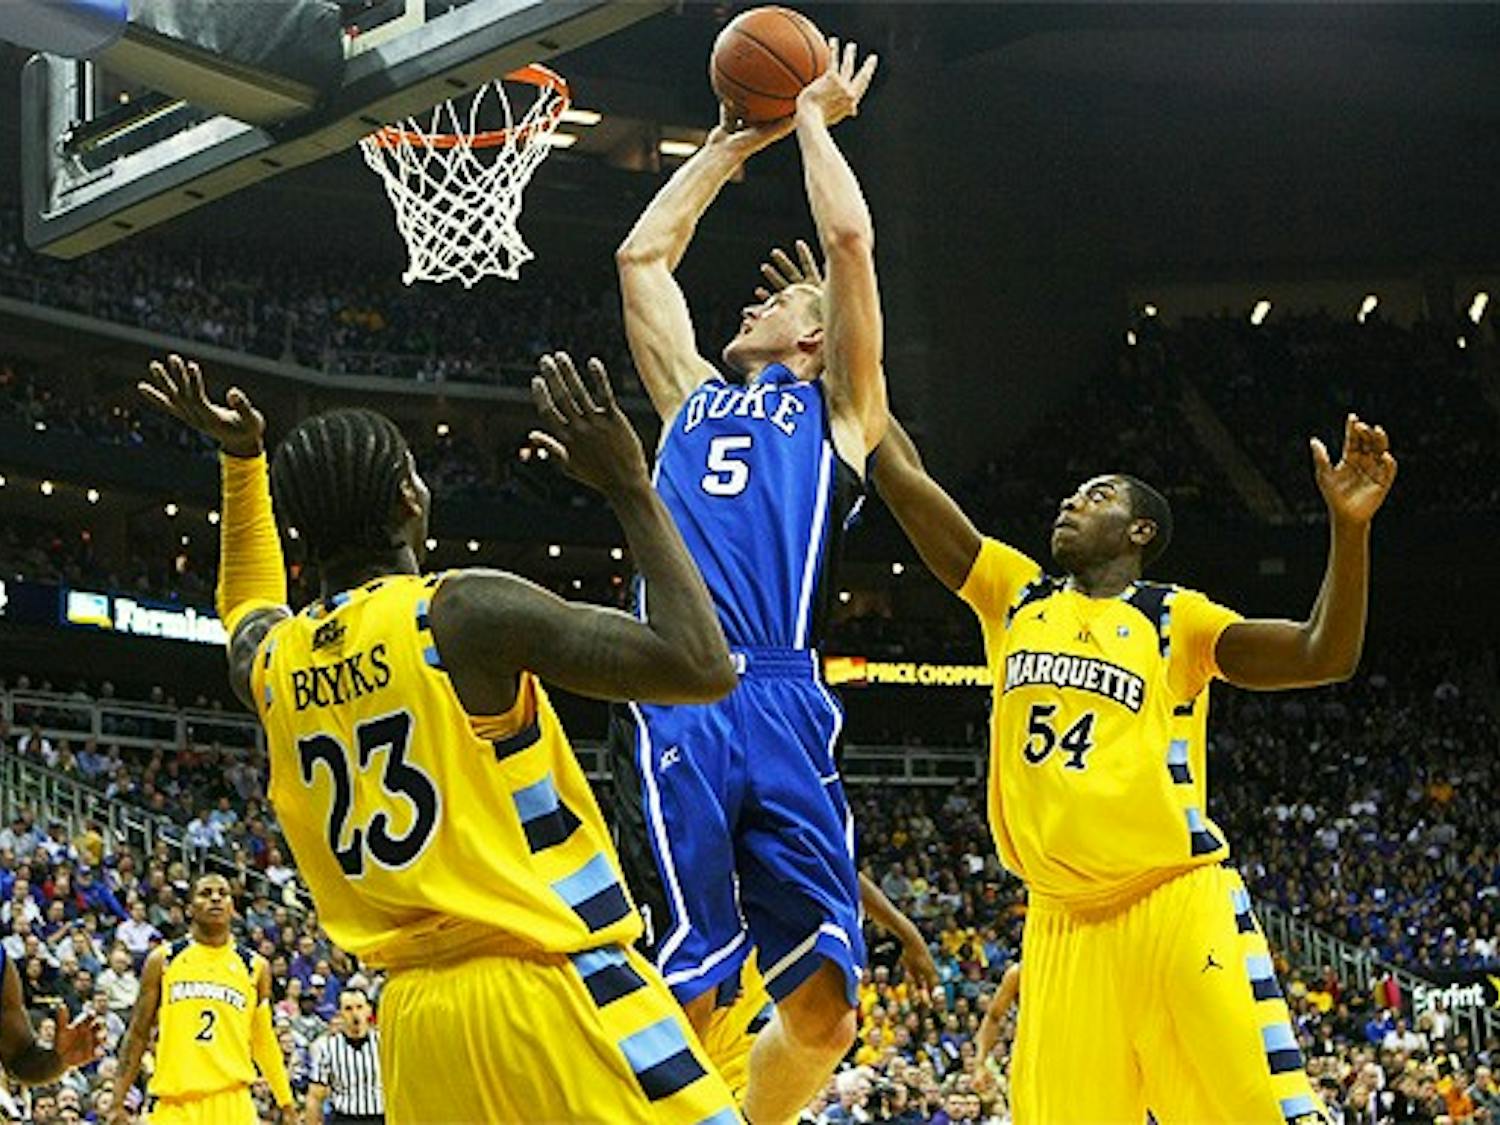 Mason Plumlee turned in his best performance yet as a Blue Devil, scoring 25 points and grabbing 12 boards.